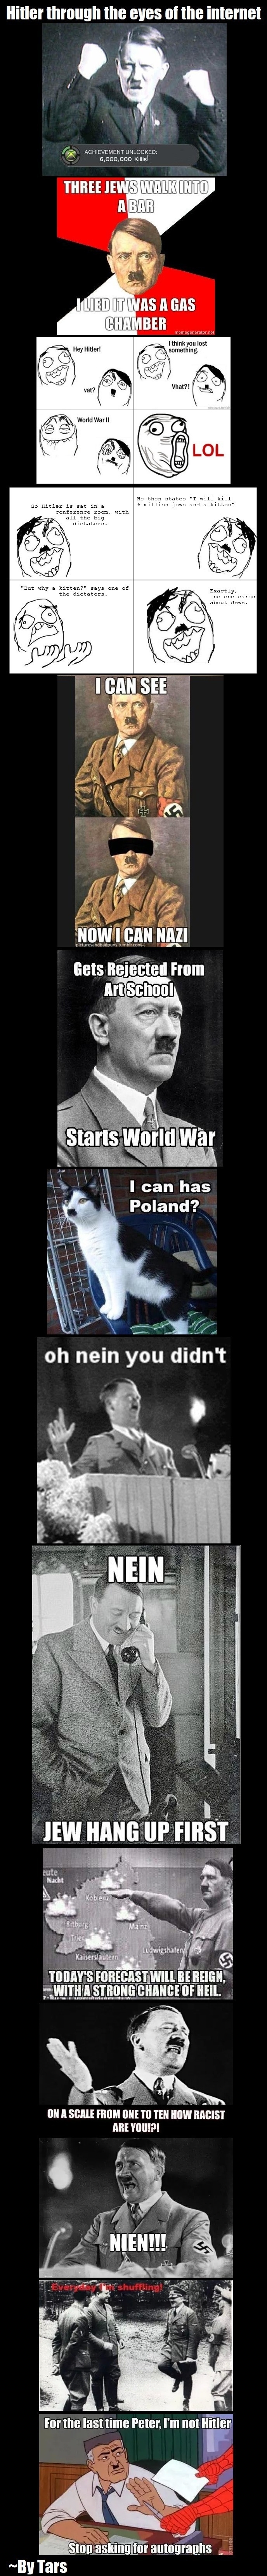 Hitlers as seen by internetters